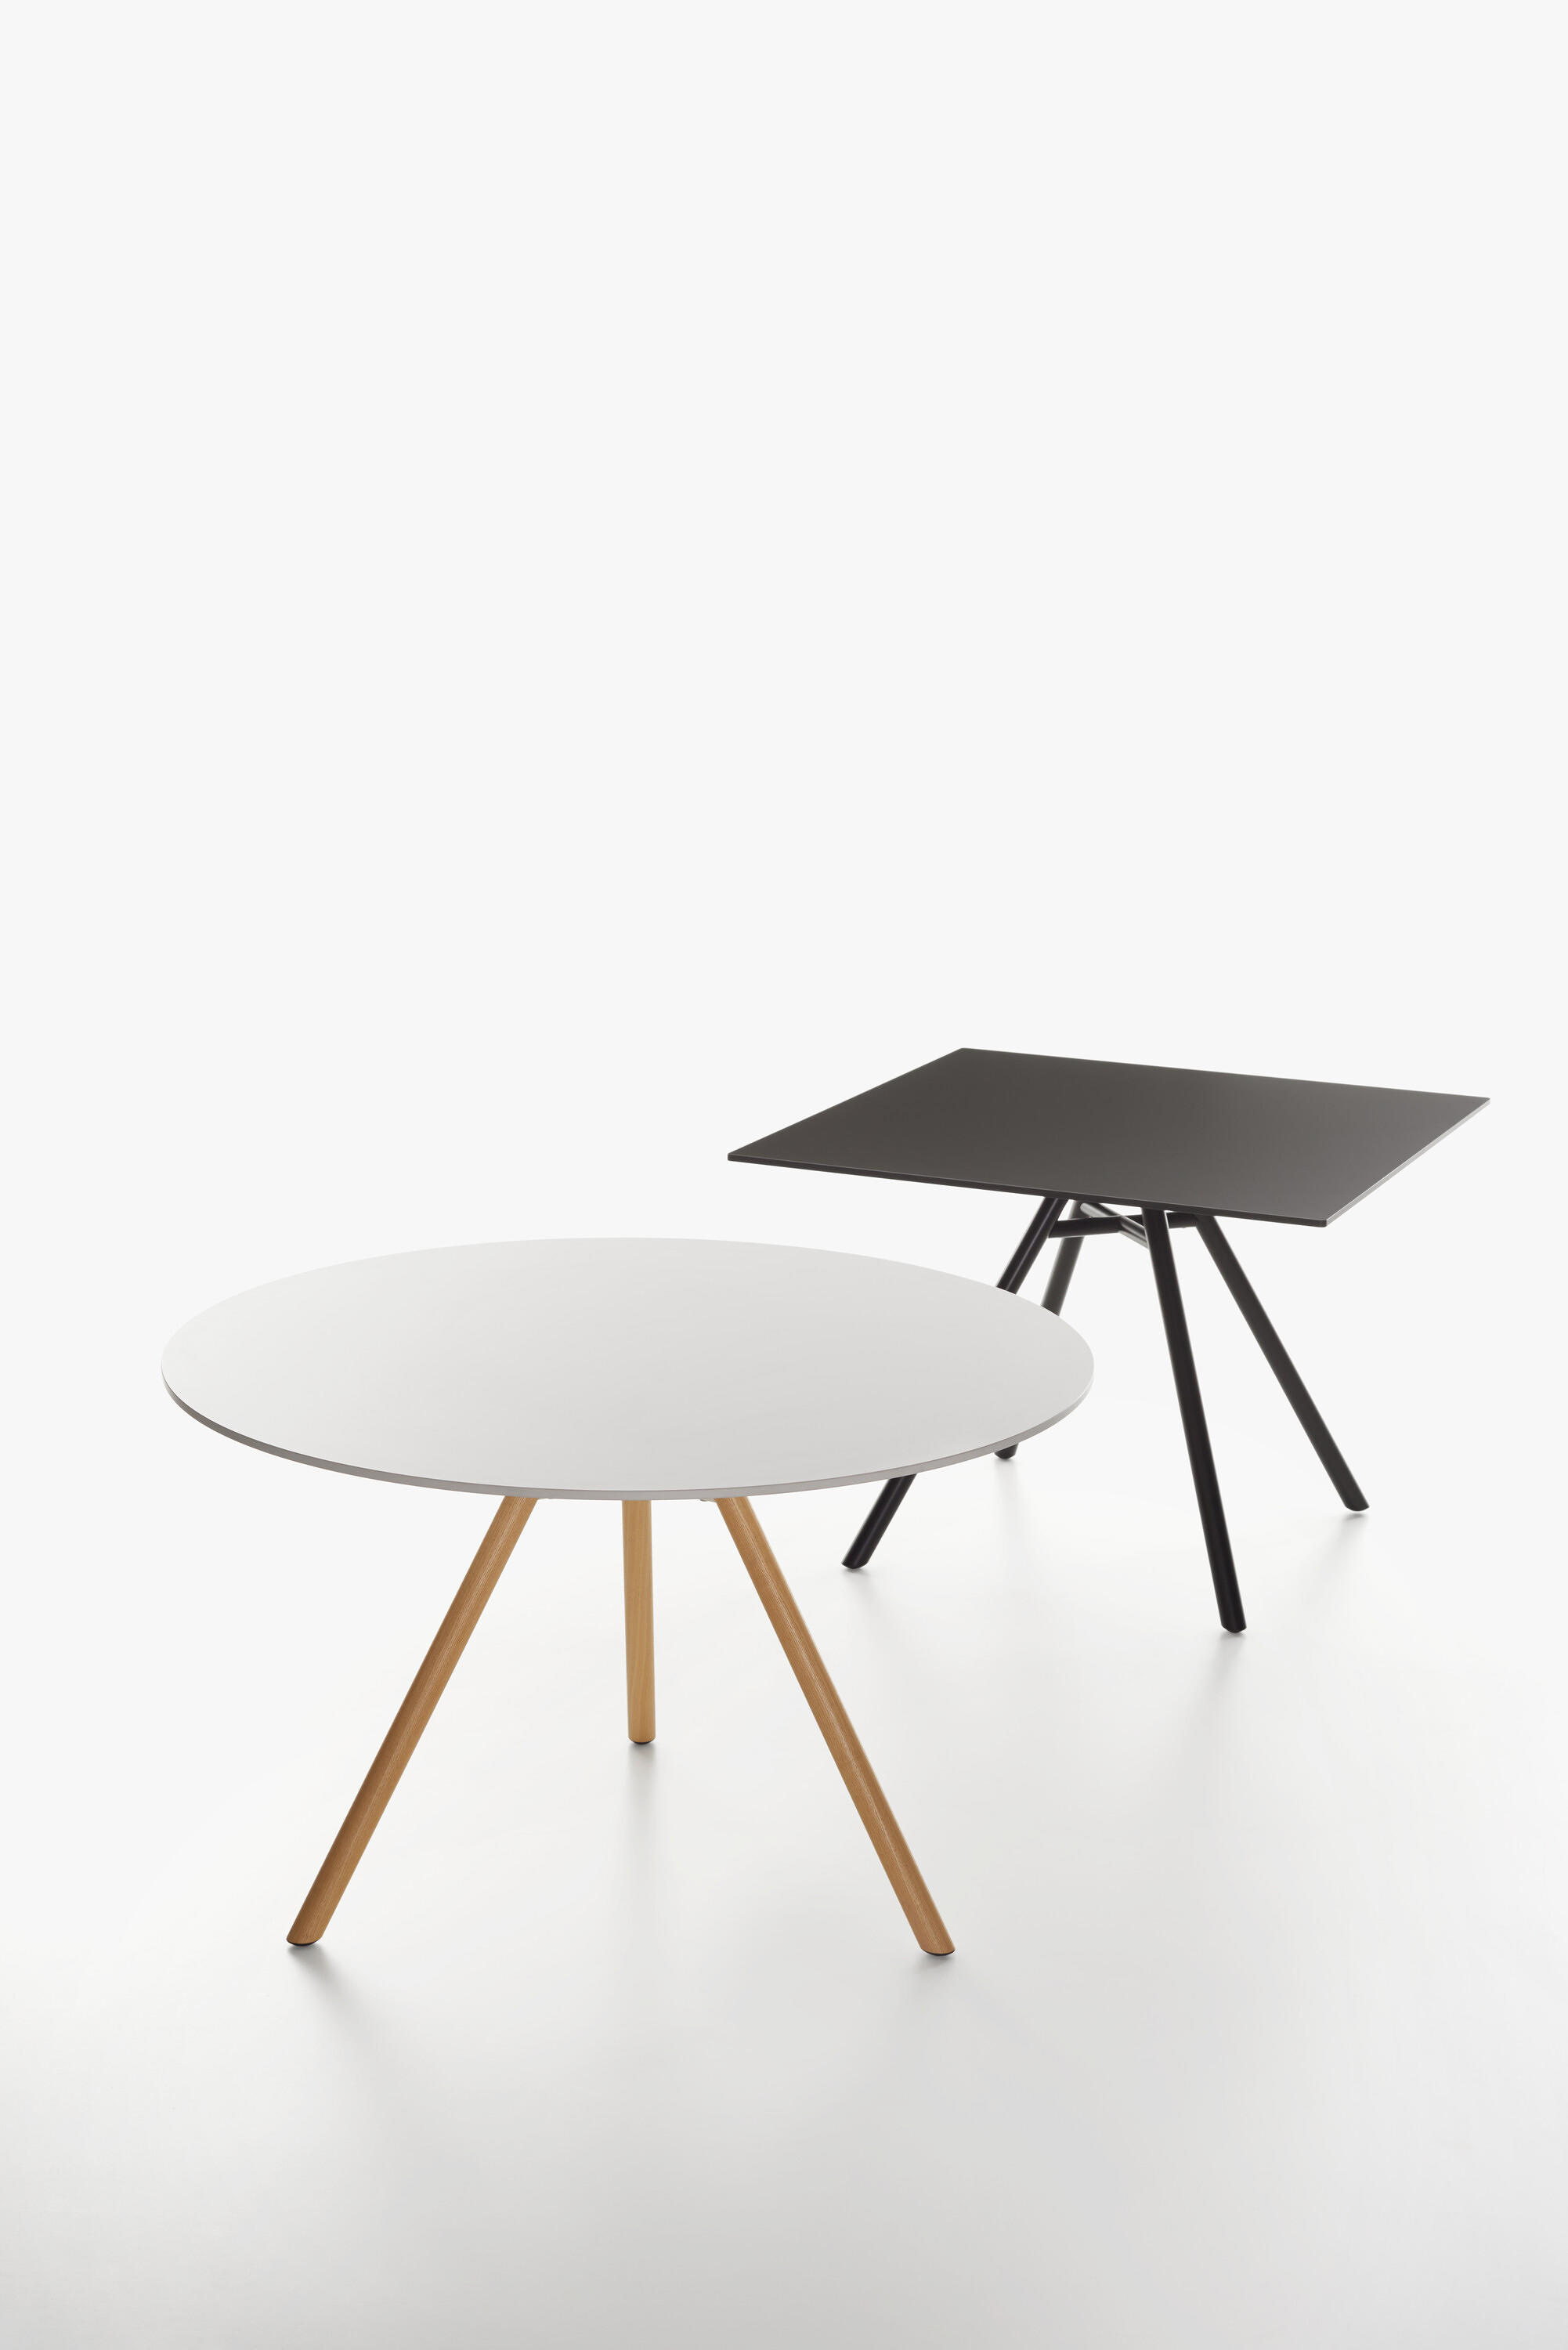 actress tofu dynamic MART TABLE - Dining tables from Plank | Architonic